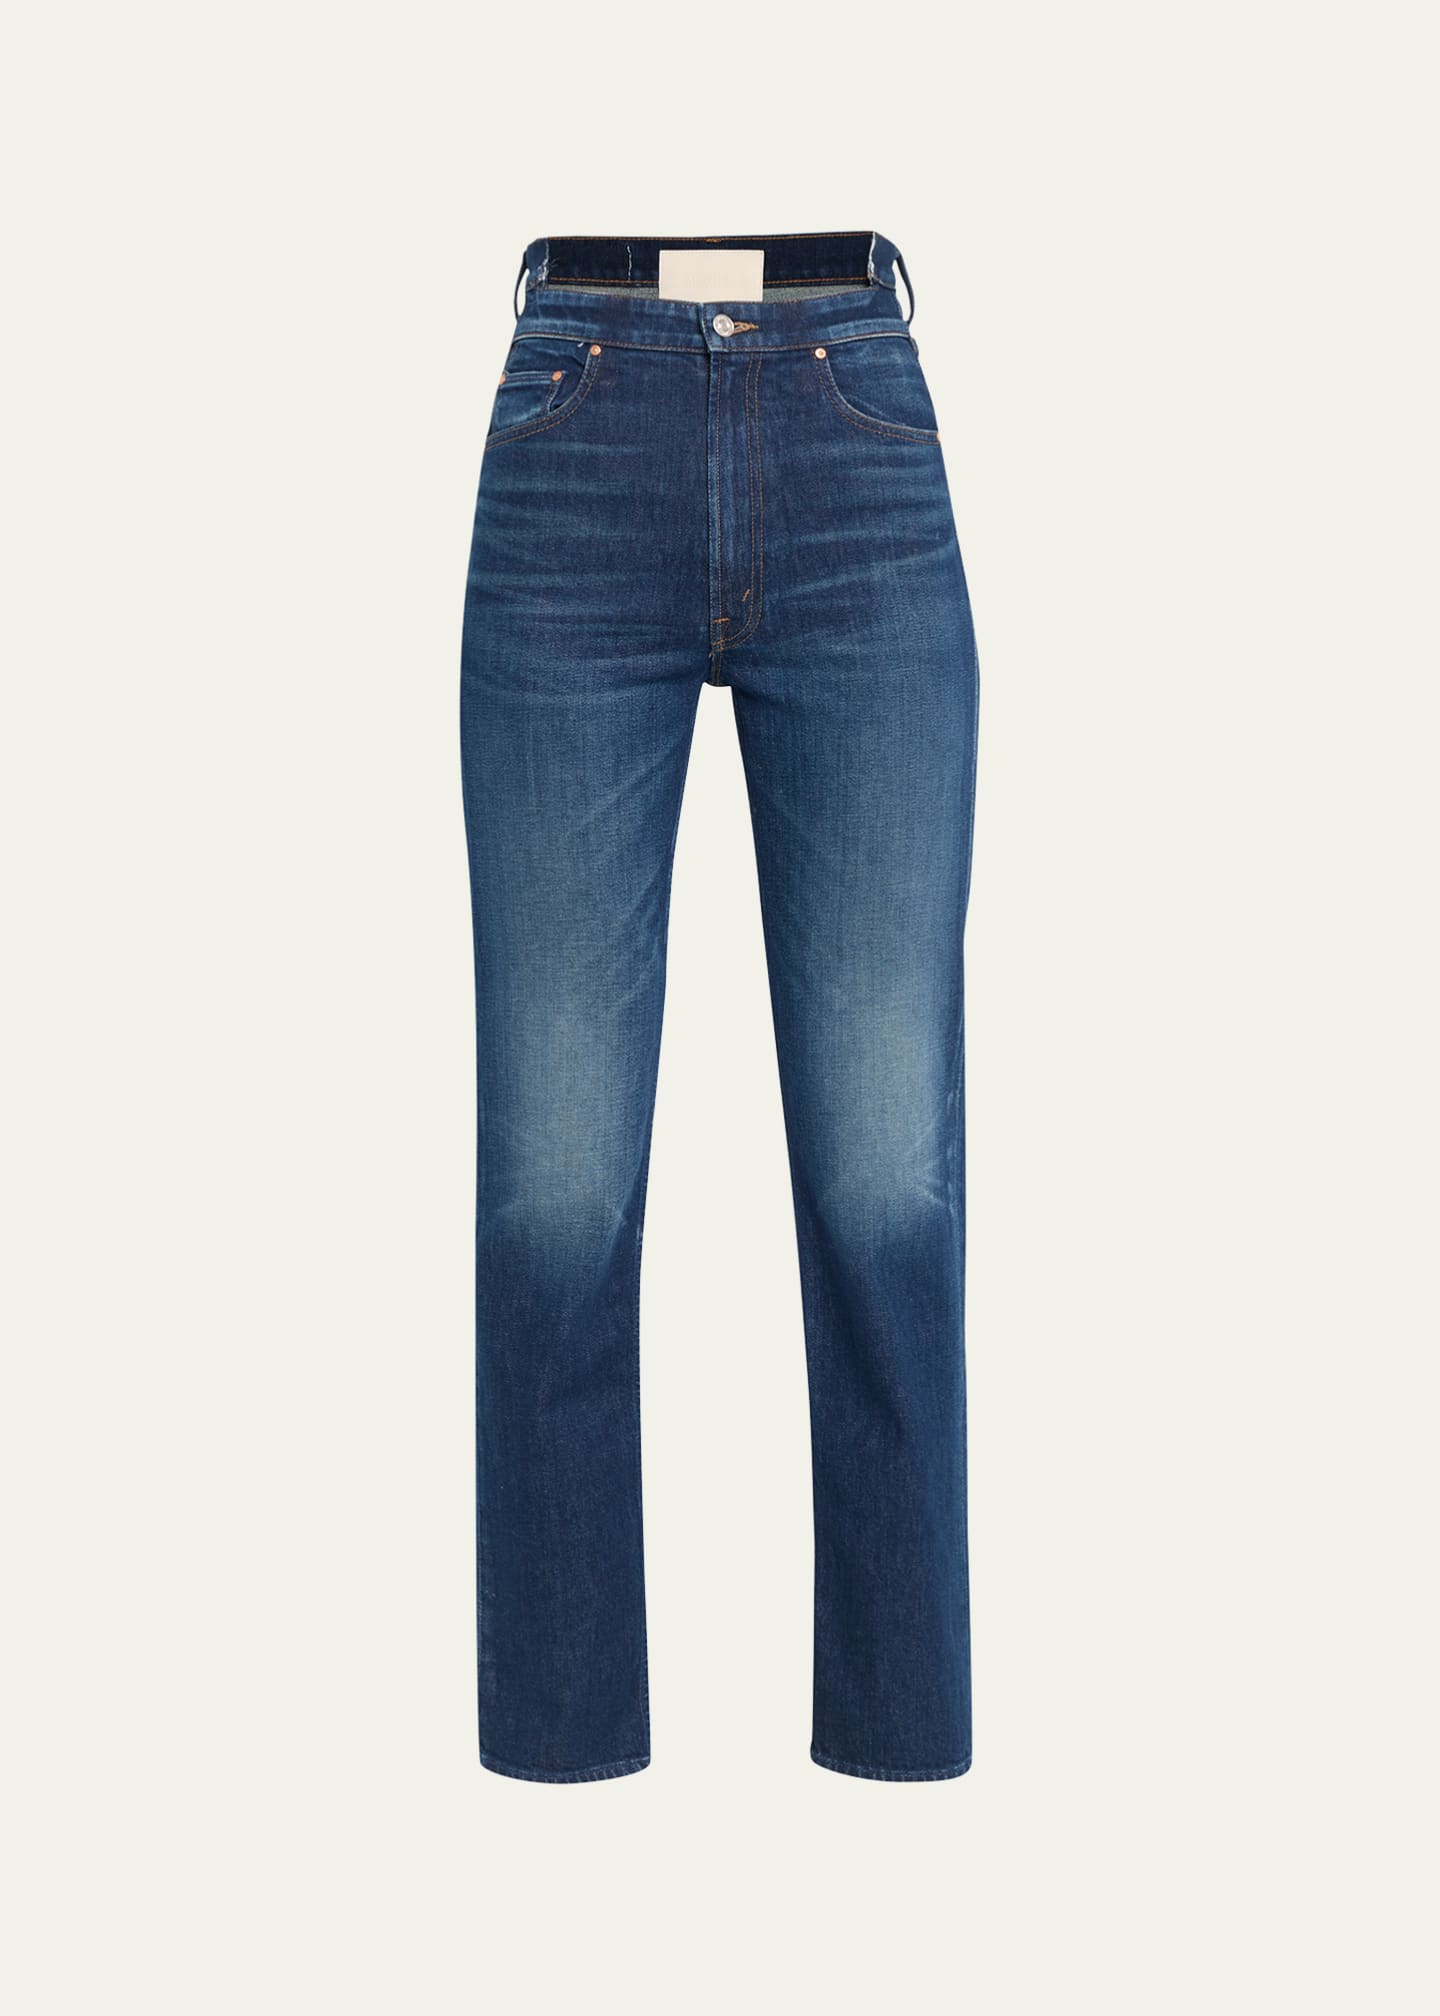 MOTHER The High Waisted Rider Shift Sneak Jeans - Bergdorf Goodman